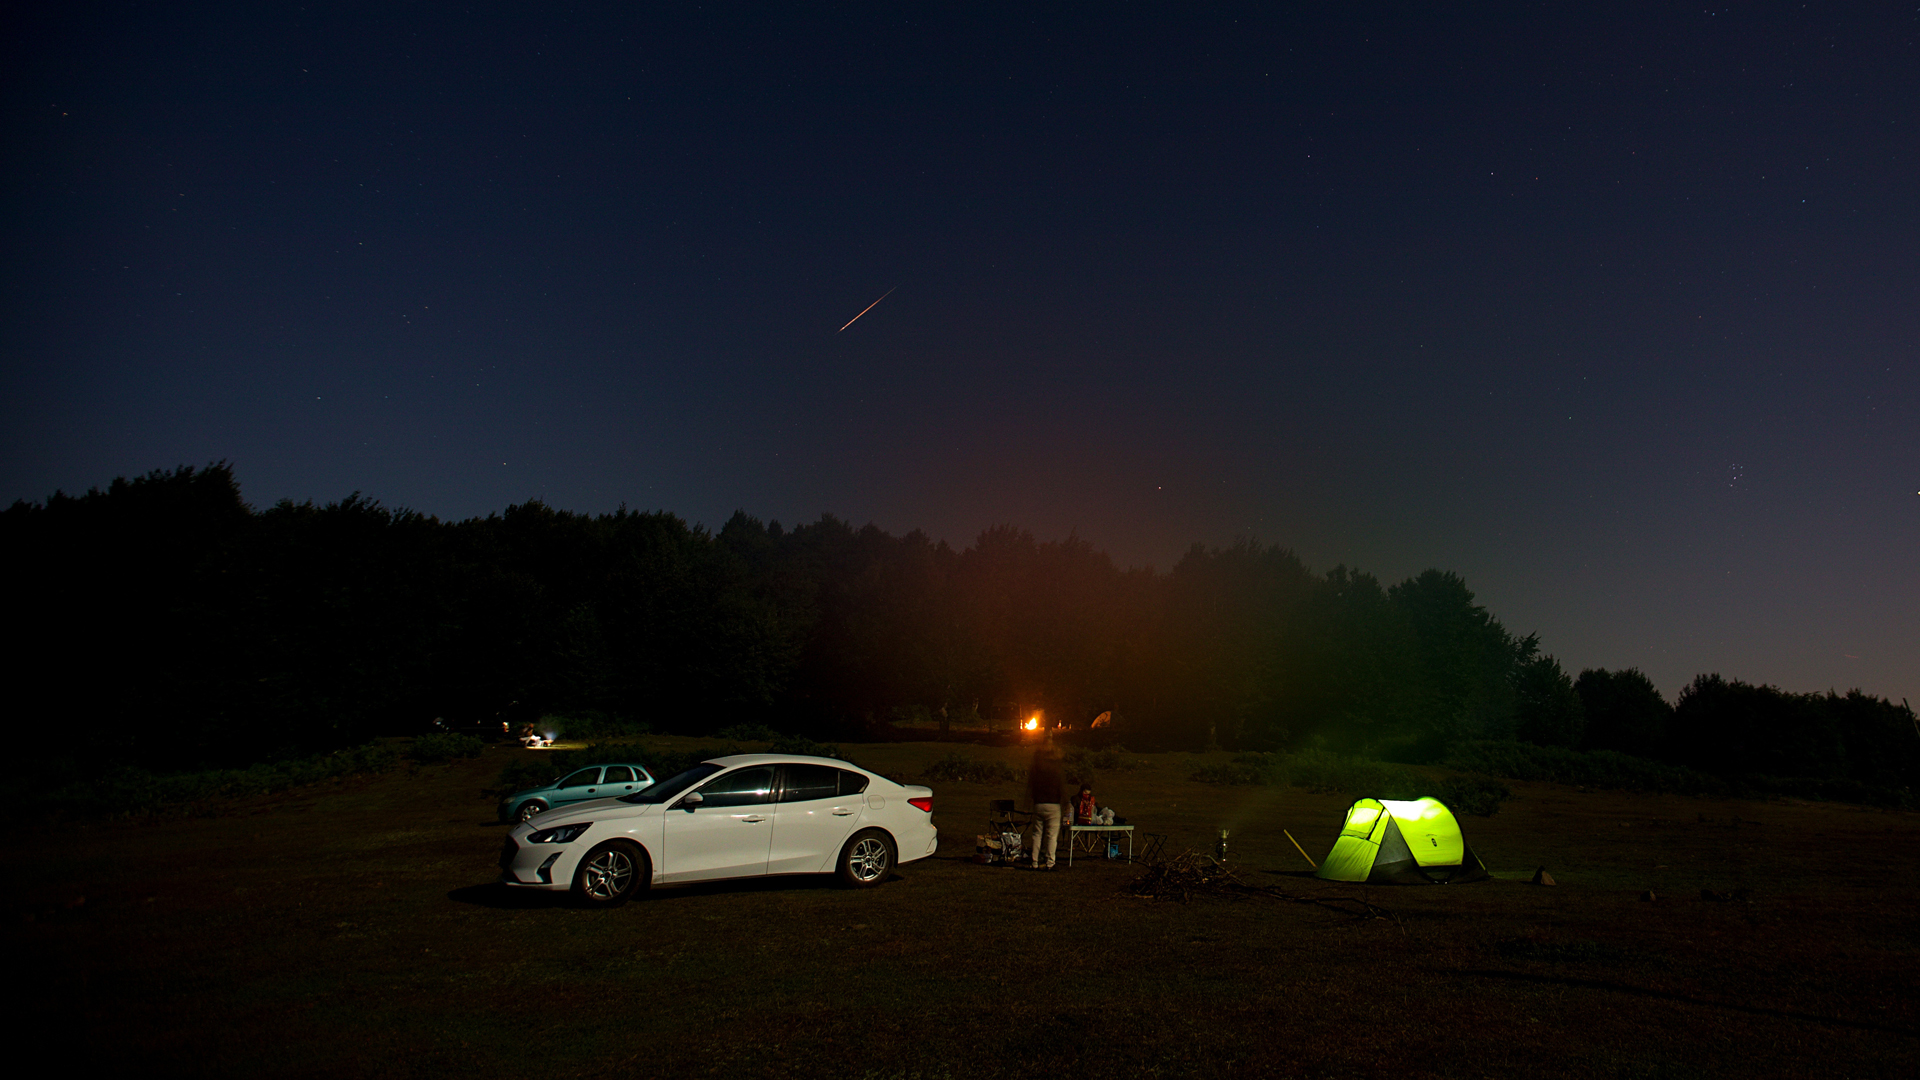 A Perseid meteor streaks over a campsite with a green tent in Turkey